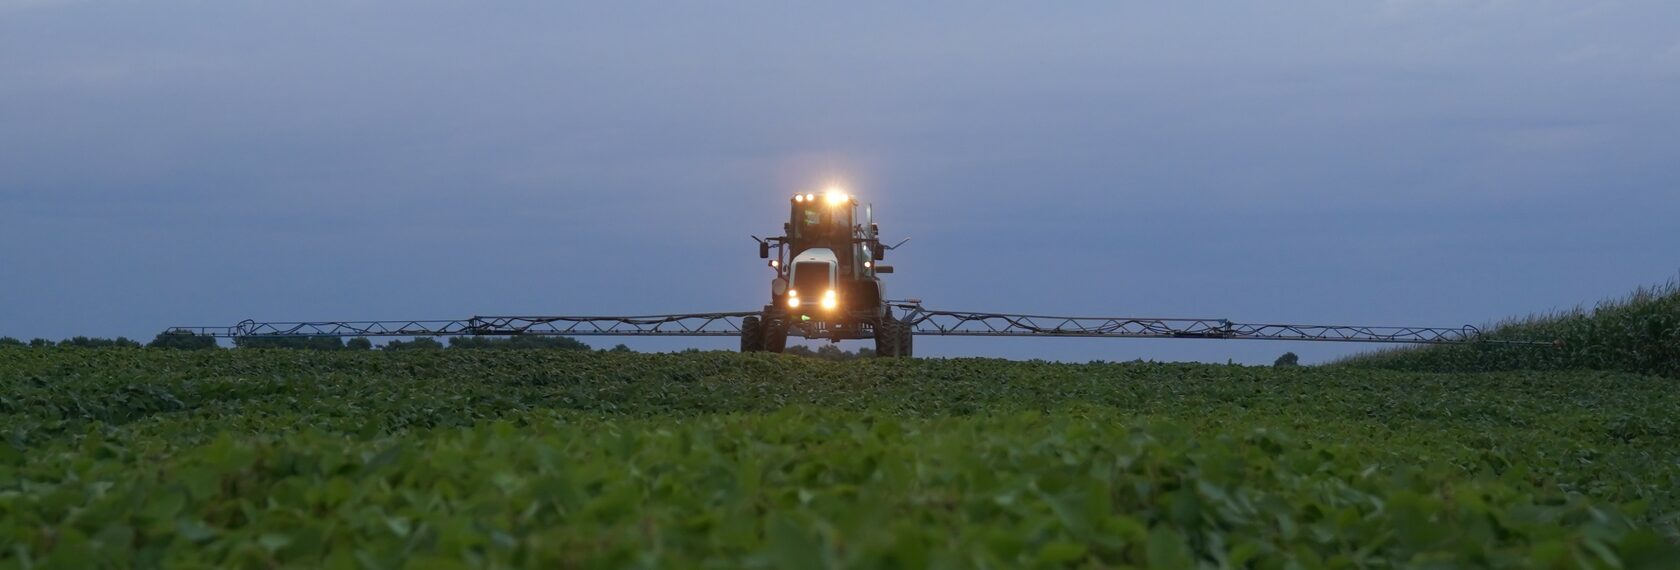 A self-propelled sprayer treating soybean field of A.G.R. Group